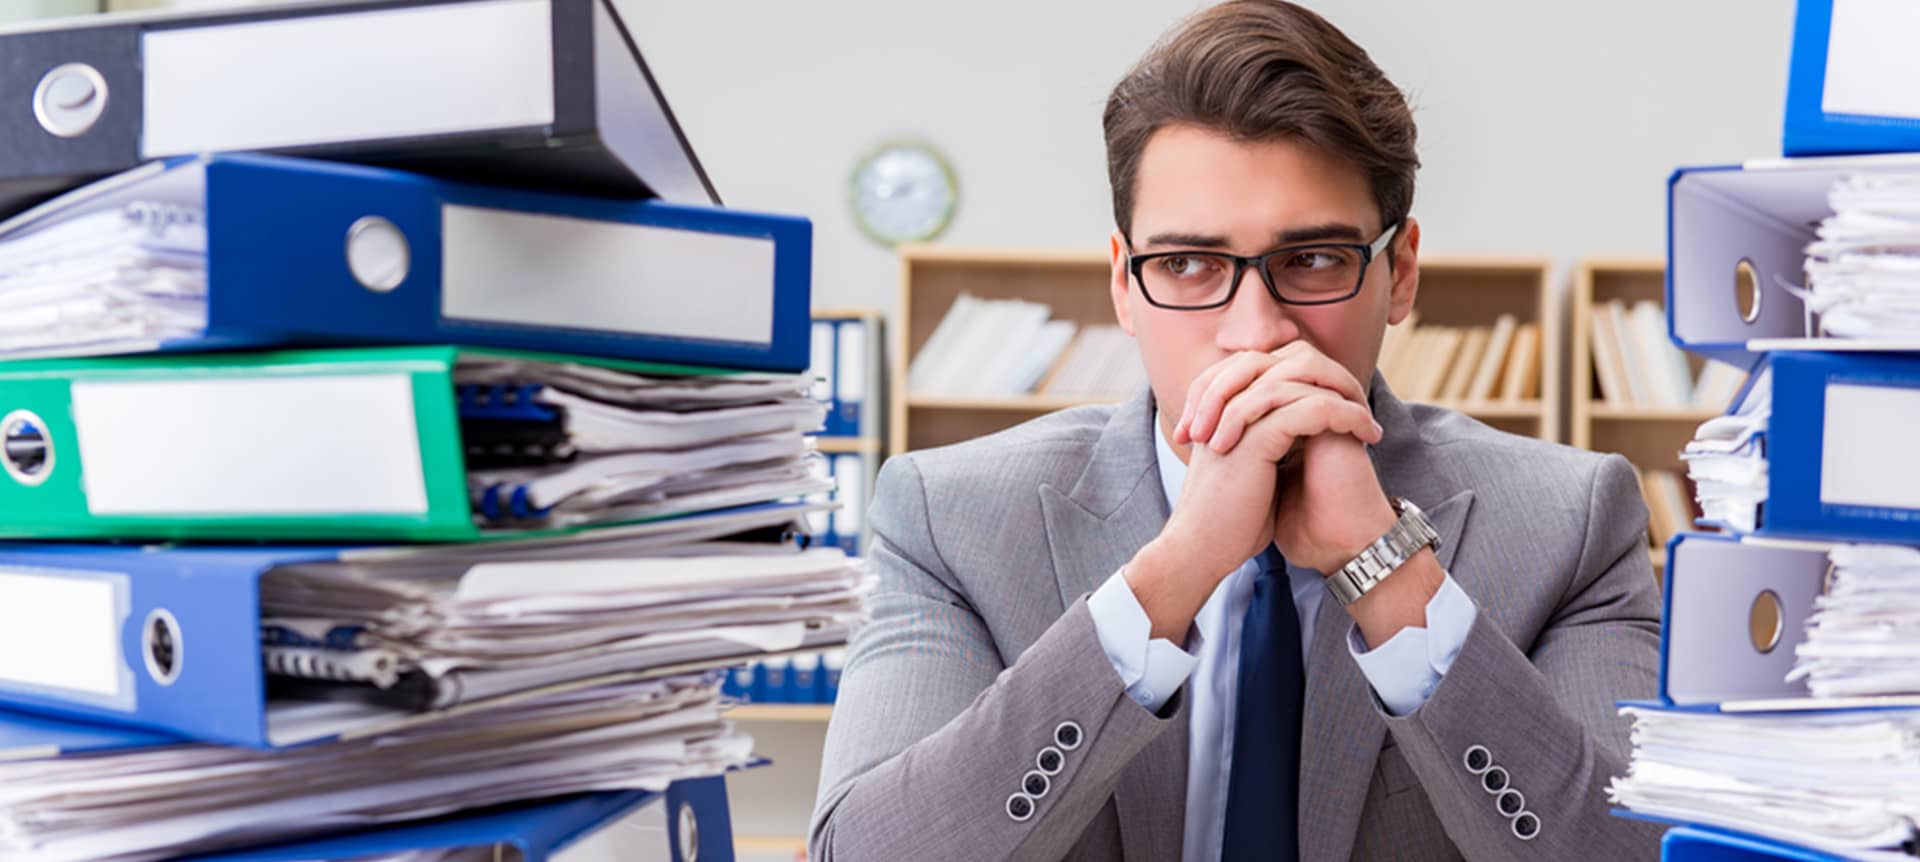 recruiter overwhelmed by papers without using hiring tools